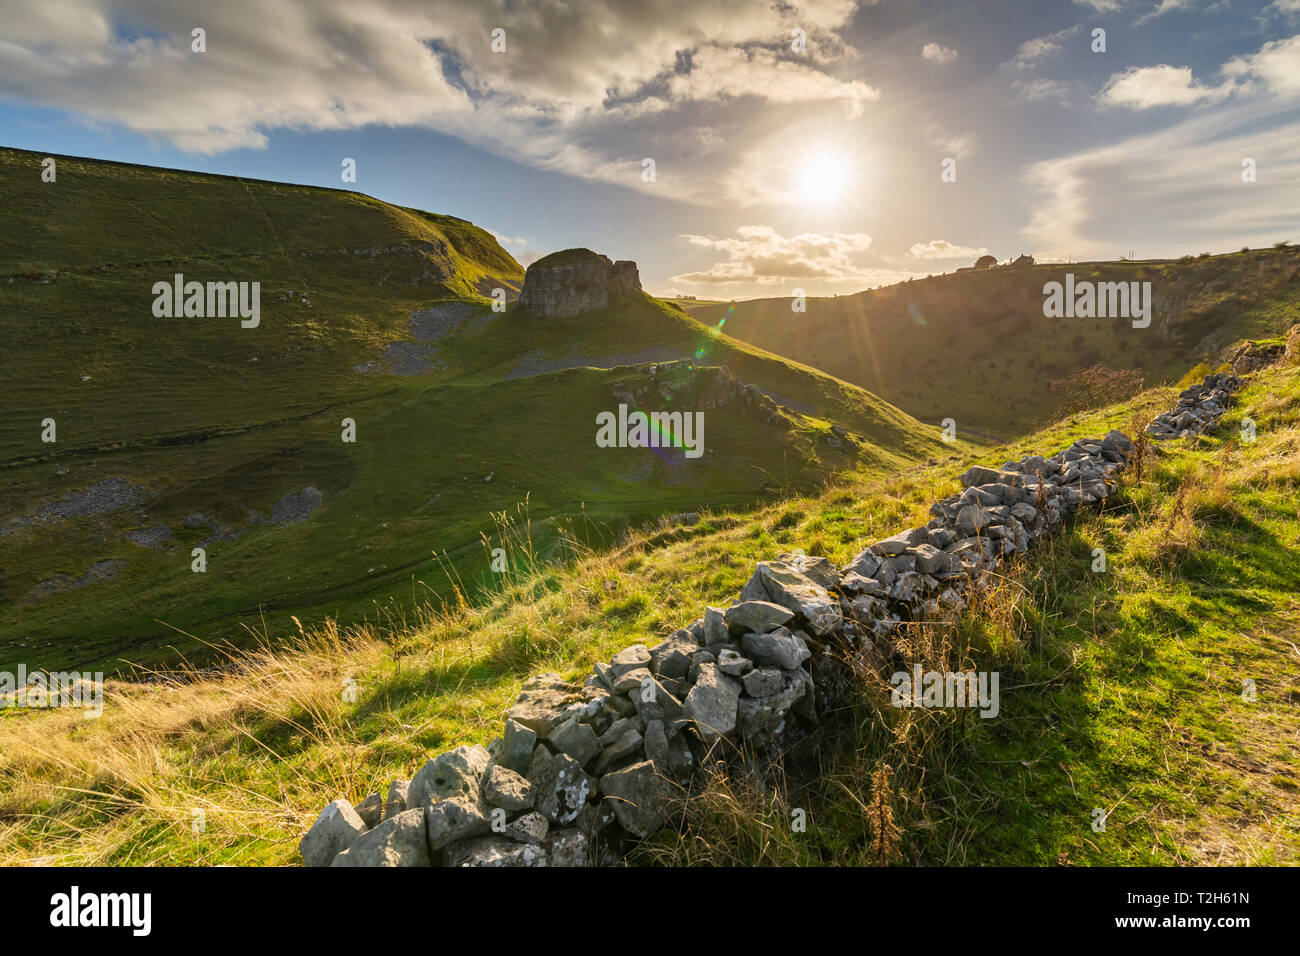 Stone wall through field in Peak District National Park, England, Europe Stock Photo